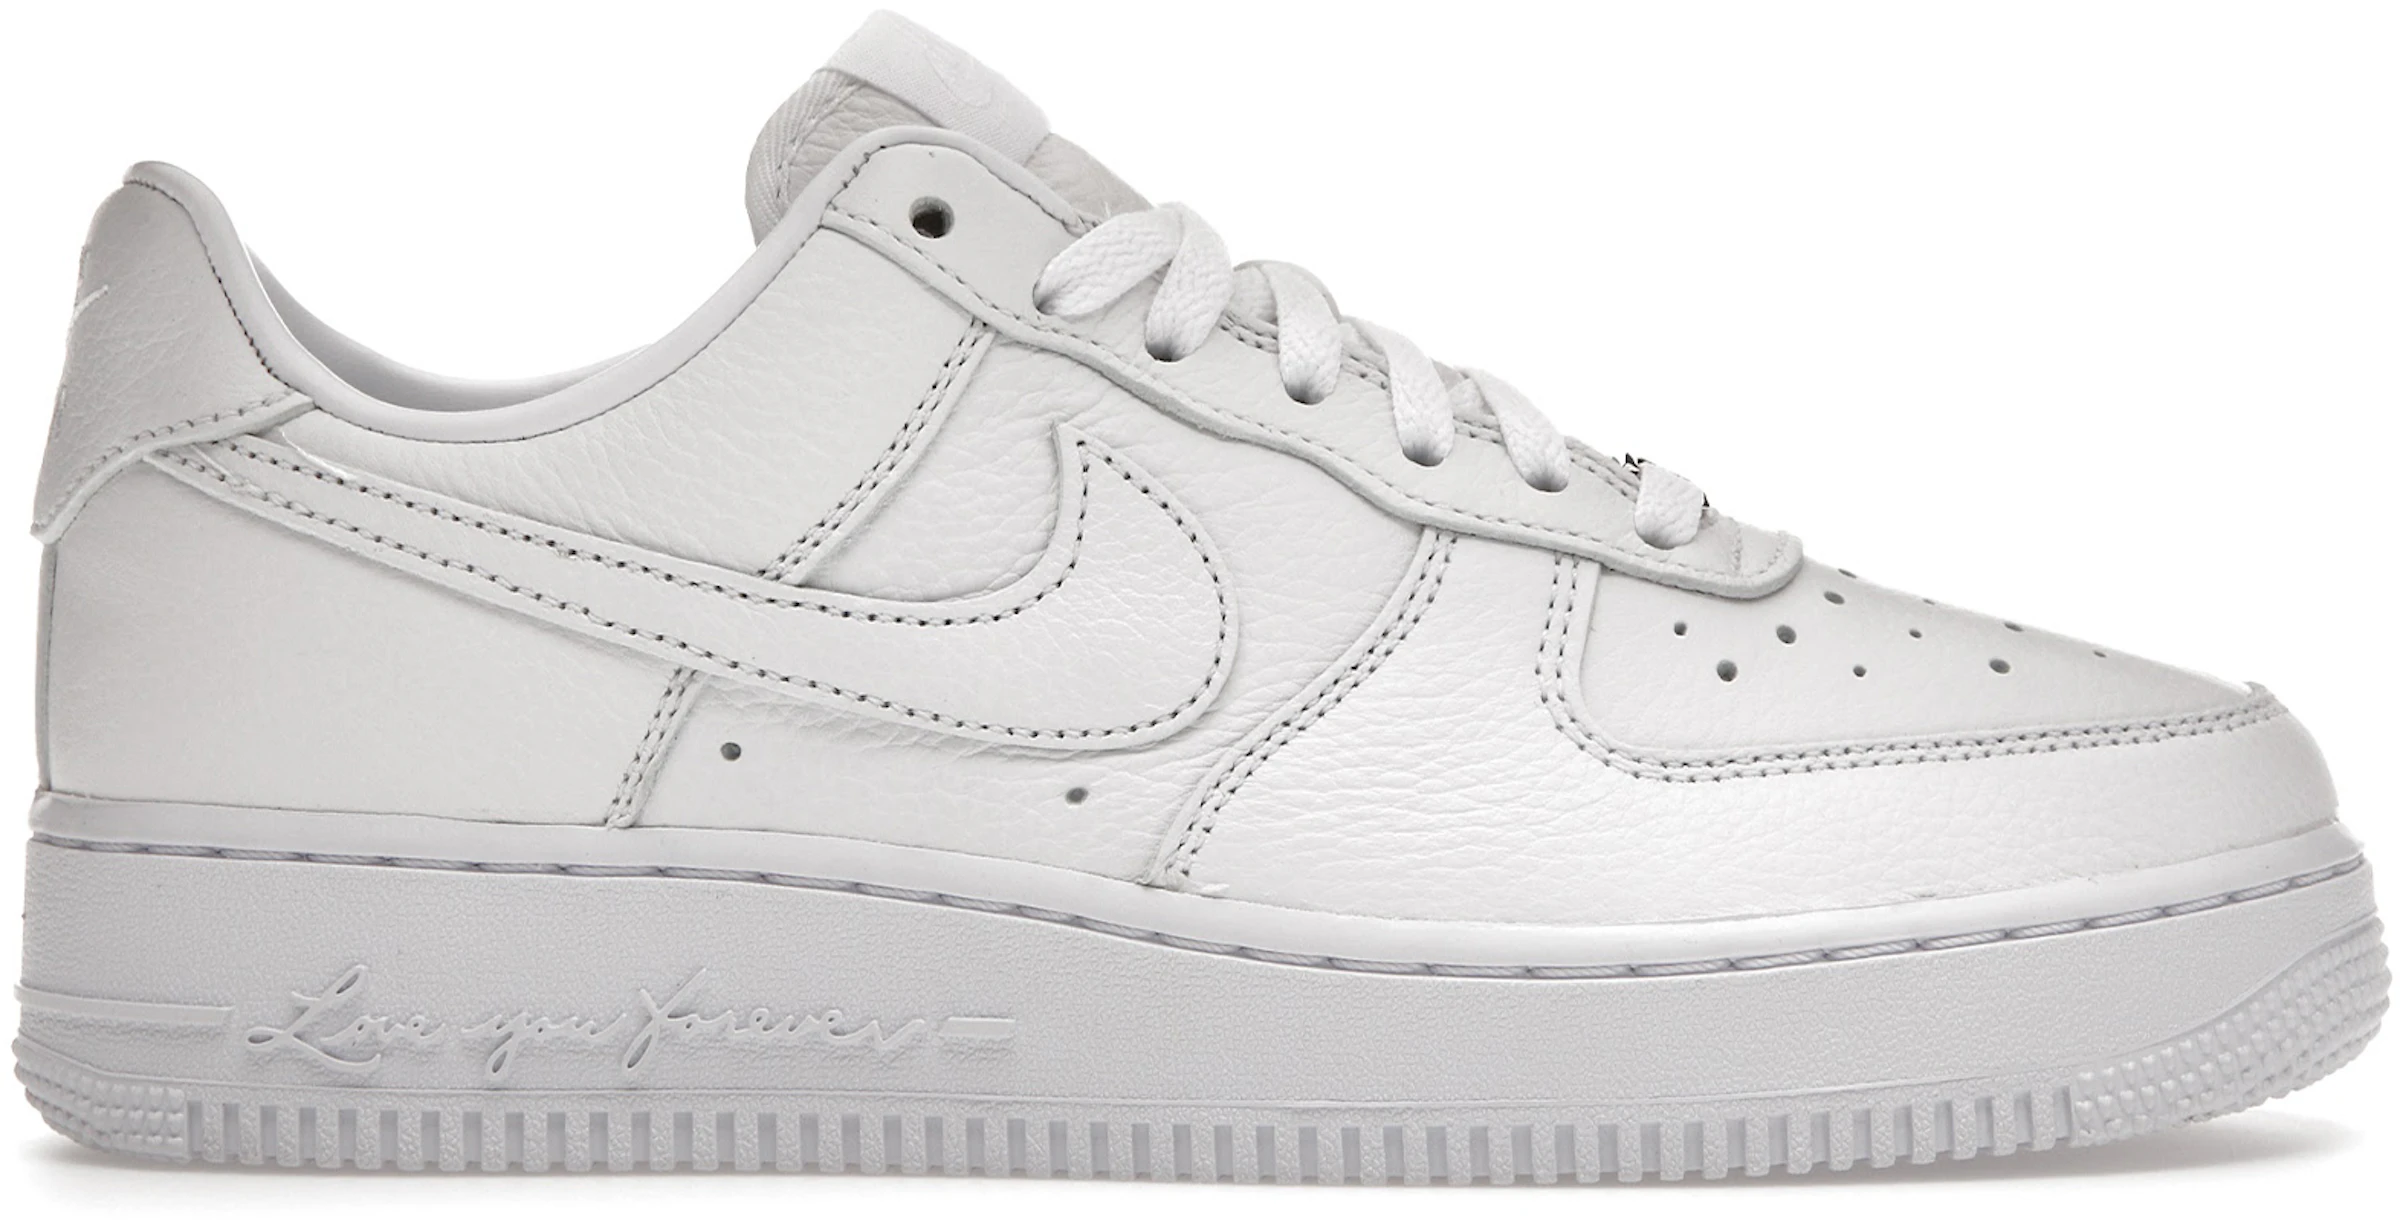 Nike Air Force 1 Low Drake NOCTA Certified Lover Boy (Includes Love You Forever Special Edition Book) - CZ8065-100 US